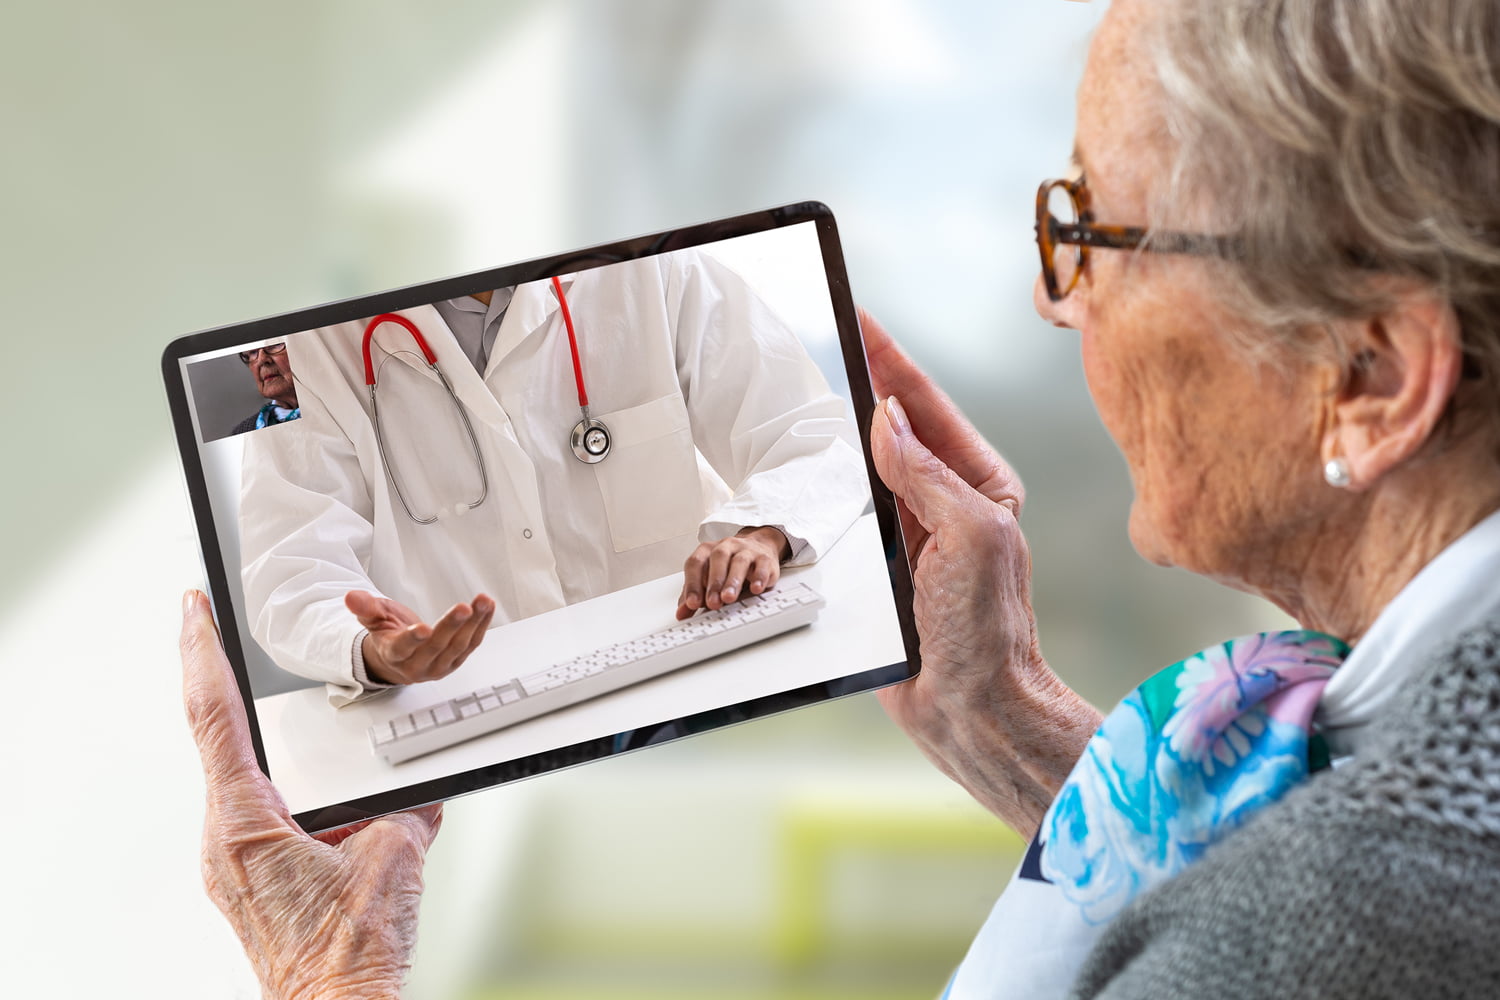 Elderly woman uses Telehealth to meet with doctor